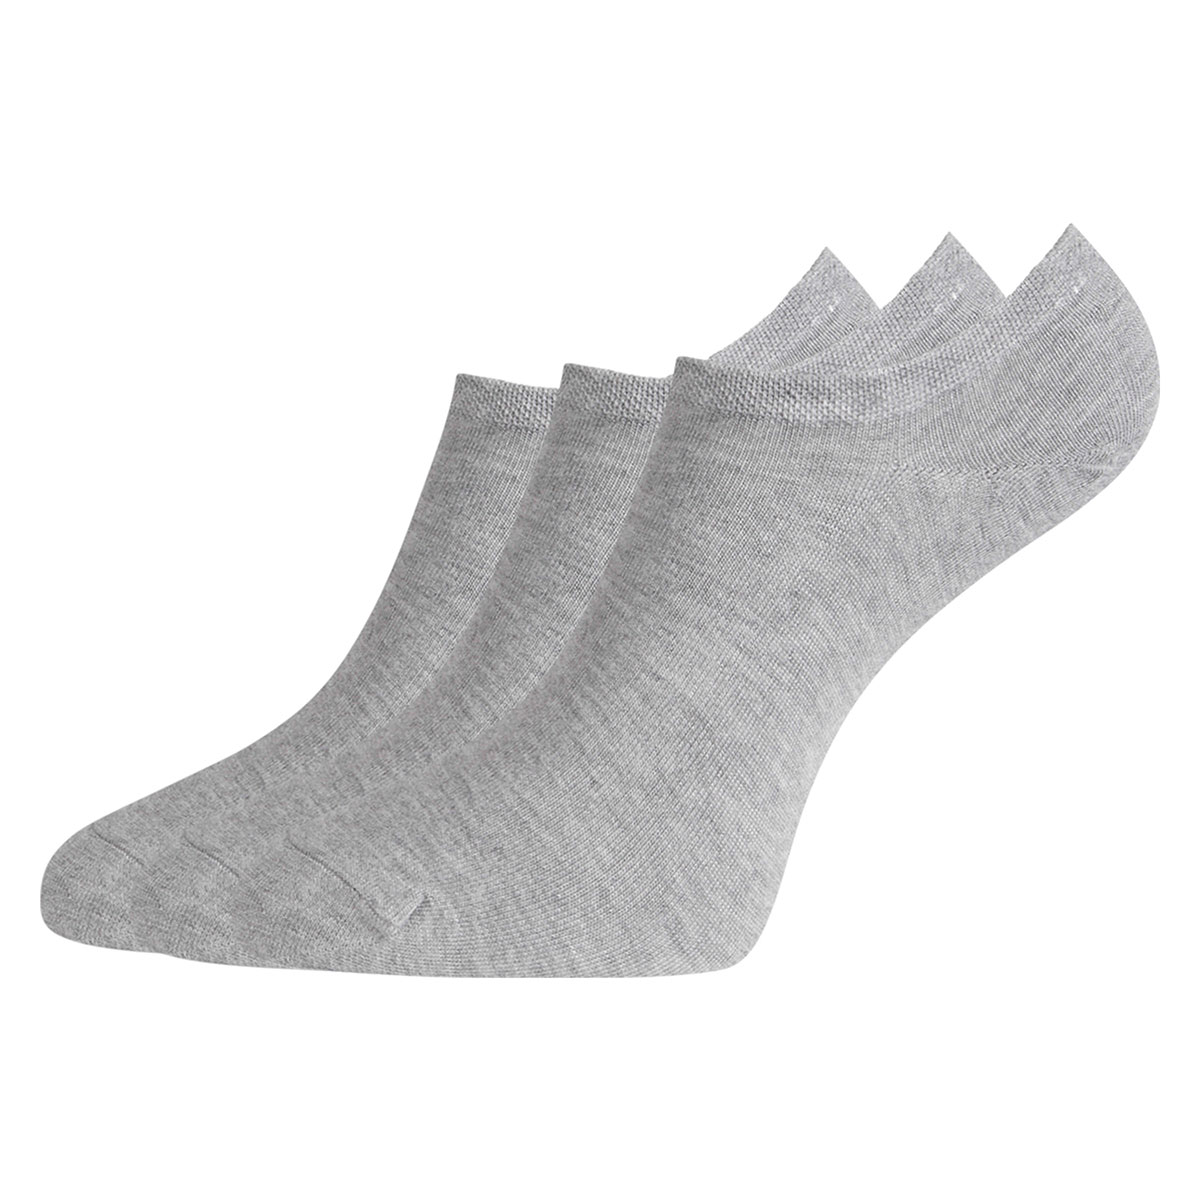 Footies Jamie (Pack of 3) - Grey Melange <table class="eigenschappen">
<tbody>
<tr>
<td width="60"><img class="size-full alignleft" src="https://bamboobasics.com/wp-content/uploads/2021/05/Zijdezacht-GROEN.png" alt="Bamboe kleding: Zijde zacht en fris" width="50" height="50" /></td>
<td><strong>Silky smooth</strong><br />
The fabric is supple and feels silky smooth. Even after several washes! </td>
</tr>
<tr>
<td width="60"><img class="size-full alignleft" src="https://bamboobasics.com/wp-content/uploads/2021/05/Thermo-GROEN.png" alt="Bamboe kleding: Zijde zacht en fris" width="50" height="50" /></td>
<td><strong>Thermo comfort</strong><br />
Bamboo textiles are warm, but also breathable. </td>
</tr>
<tr>
<td width="60"><img class="size-full alignleft" src="https://bamboobasics.com/wp-content/uploads/2021/05/Fresh-GROEN.png" alt="Bamboe kleding: Zijde zacht en fris" width="50" height="50" /></td>
<td><strong>Fresh</strong><br />
The bamboo fibers ensure that moisture absorbs and evaporates faster. Bamboo absorbs up to 70% more moisture than cotton. </td>
</tr>
<tr>
<td width="60"><img class="size-full alignleft" src="https://bamboobasics.com/wp-content/uploads/2021/05/UV-protection-GROEN.png" alt="Bamboe kleding: Zijde zacht en fris" width="50" height="50" /></td>
<td><strong>UV protection</strong><br />
Bamboo is naturally UV protective and filters 98% of harmful UV rays. </td>
</tr>
<tr>
<td width="60"><img class="size-full alignleft" src="https://bamboobasics.com/wp-content/uploads/2021/05/Allergeen-GROEN.png" alt="Bamboe kleding: Zijde zacht en fris" width="50" height="50" /></td>
<td><strong>Hypoallergenic</strong><br />
Do you have sensitive skin or suffer from allergies? Then bamboo underwear is the ideal choice for you. </td>
</tr>
<tr>
<td width="60"><img class="size-full alignleft" src="https://bamboobasics.com/wp-content/uploads/2021/05/Fit-GROEN.png" alt="Bamboe kleding: Zijde zacht en fris" width="50" height="50" /></td>
<td><strong>Perfect fit</strong><br />
The combination of elastane and cotton with bamboo ensures an extra strong fabric and a perfect fit. </td>
</tr>
</tbody>
</table>